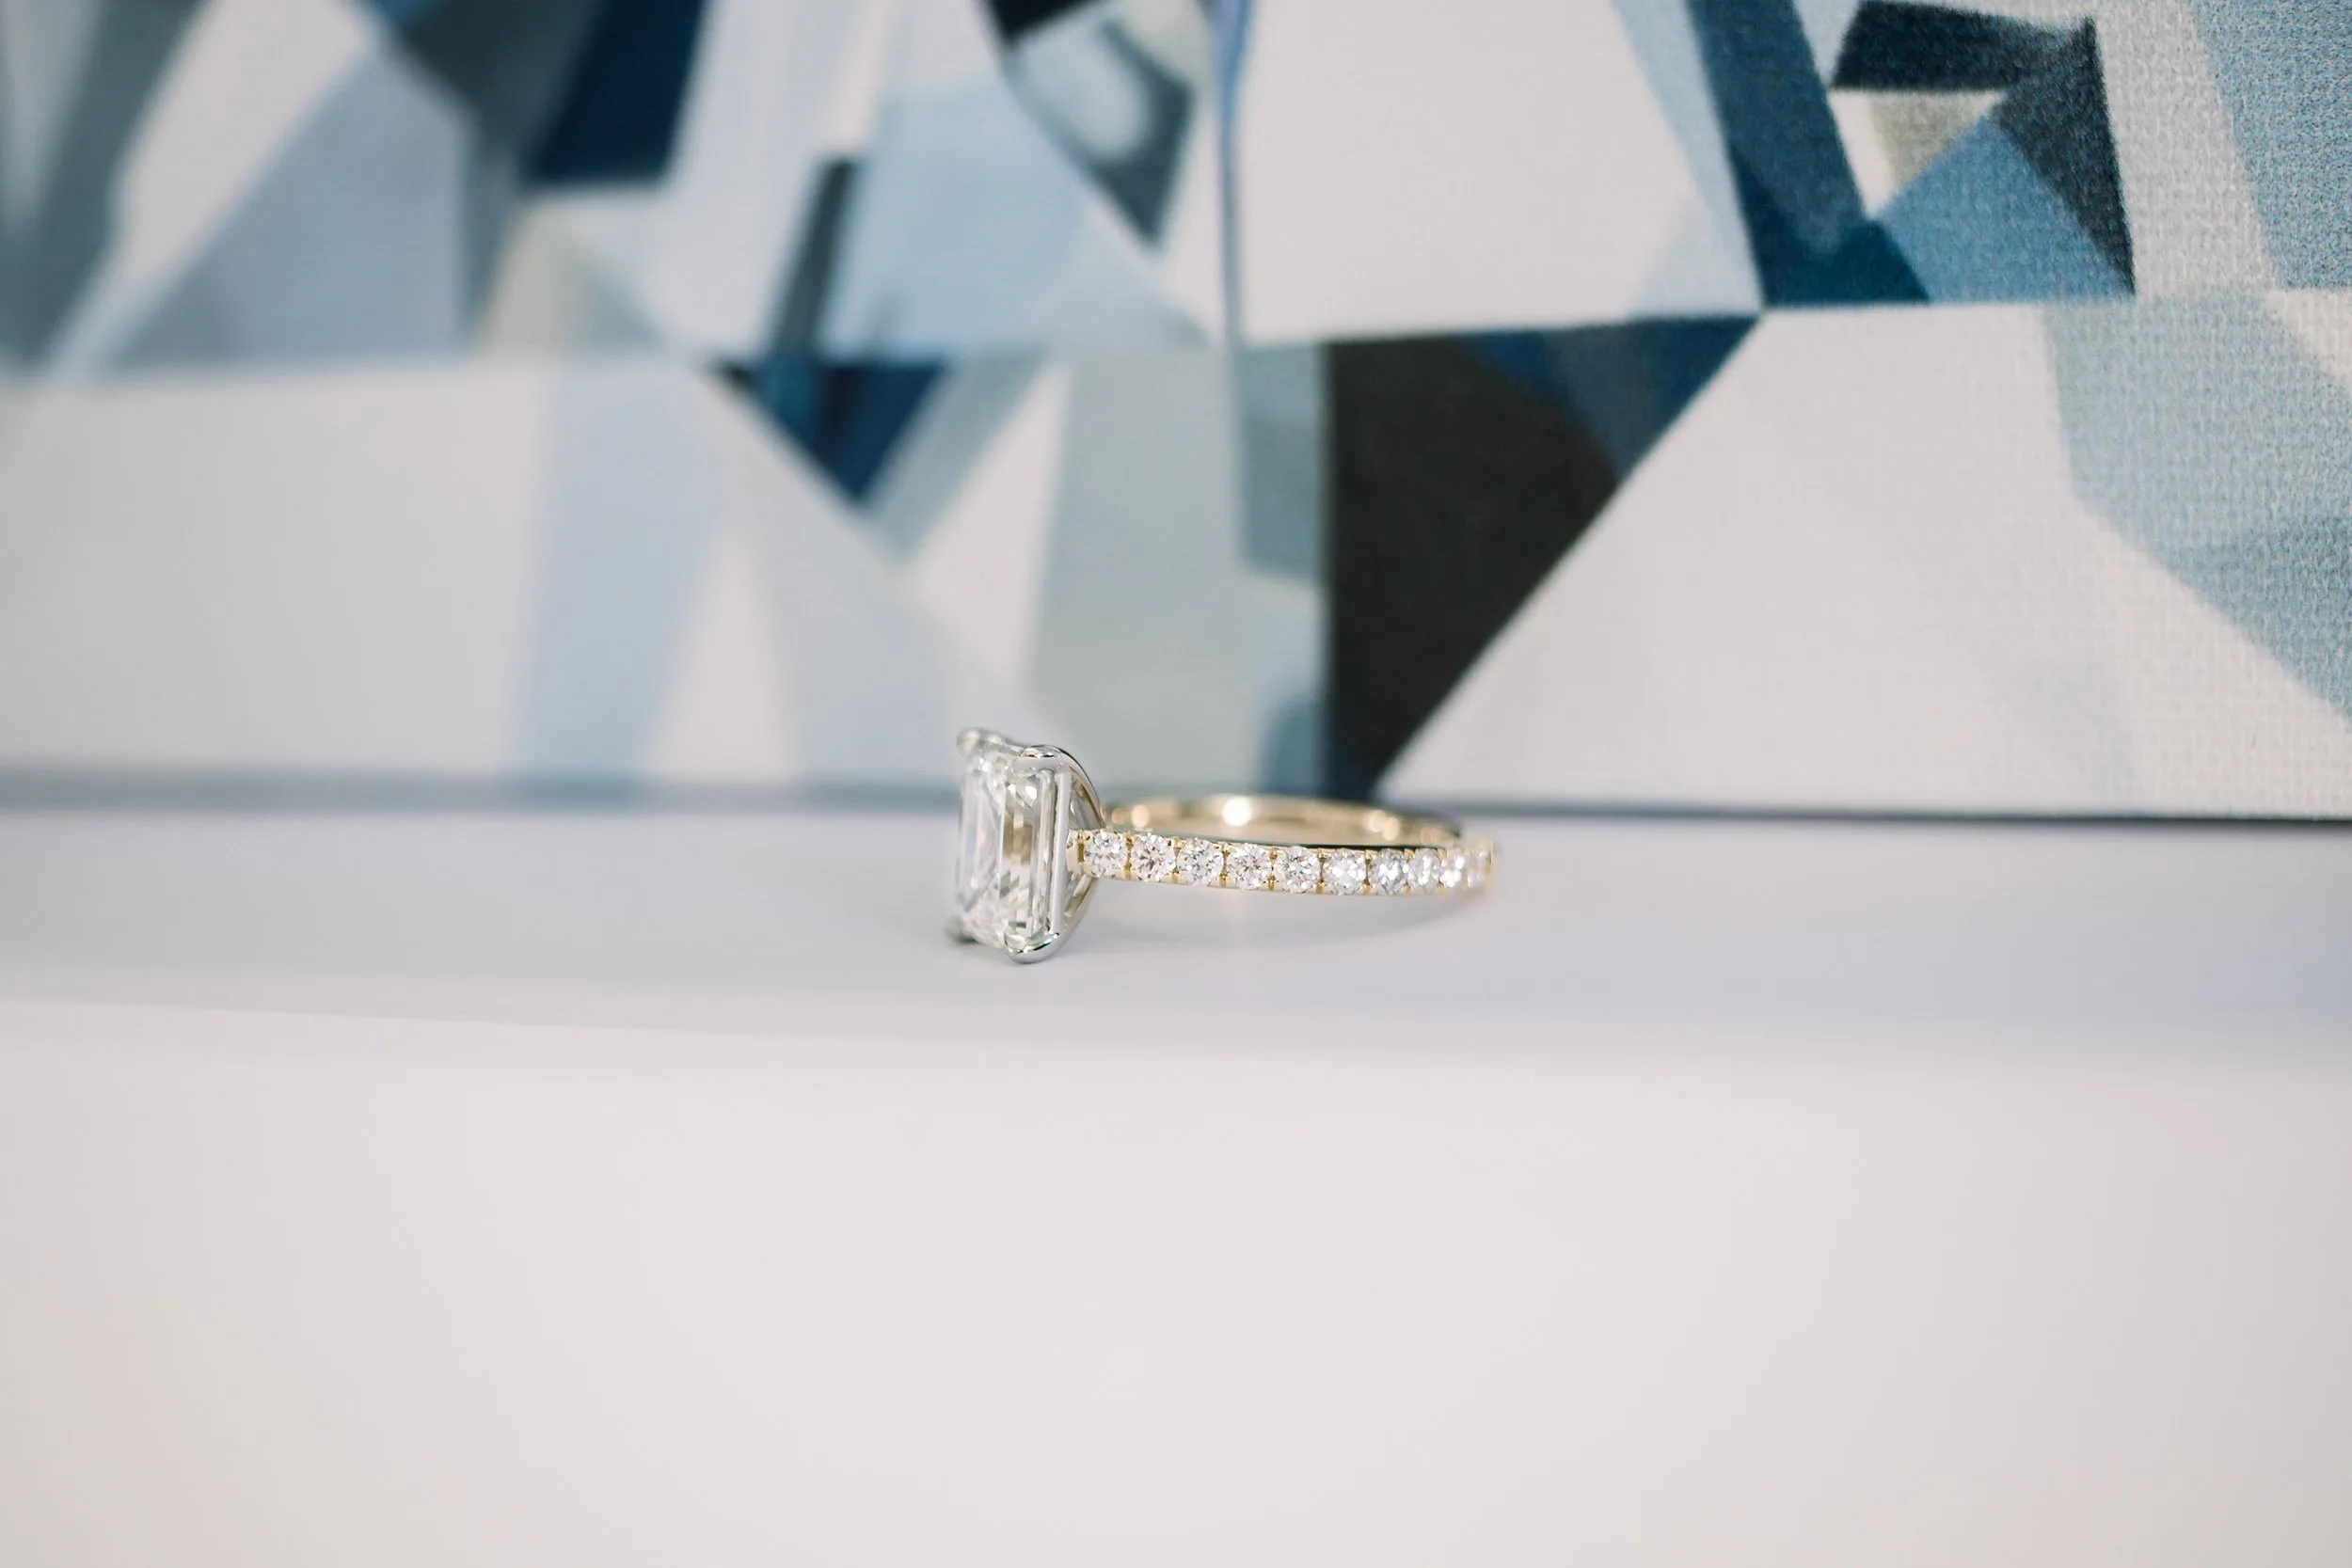 2.5ct emerald cut in cathedral pave setting